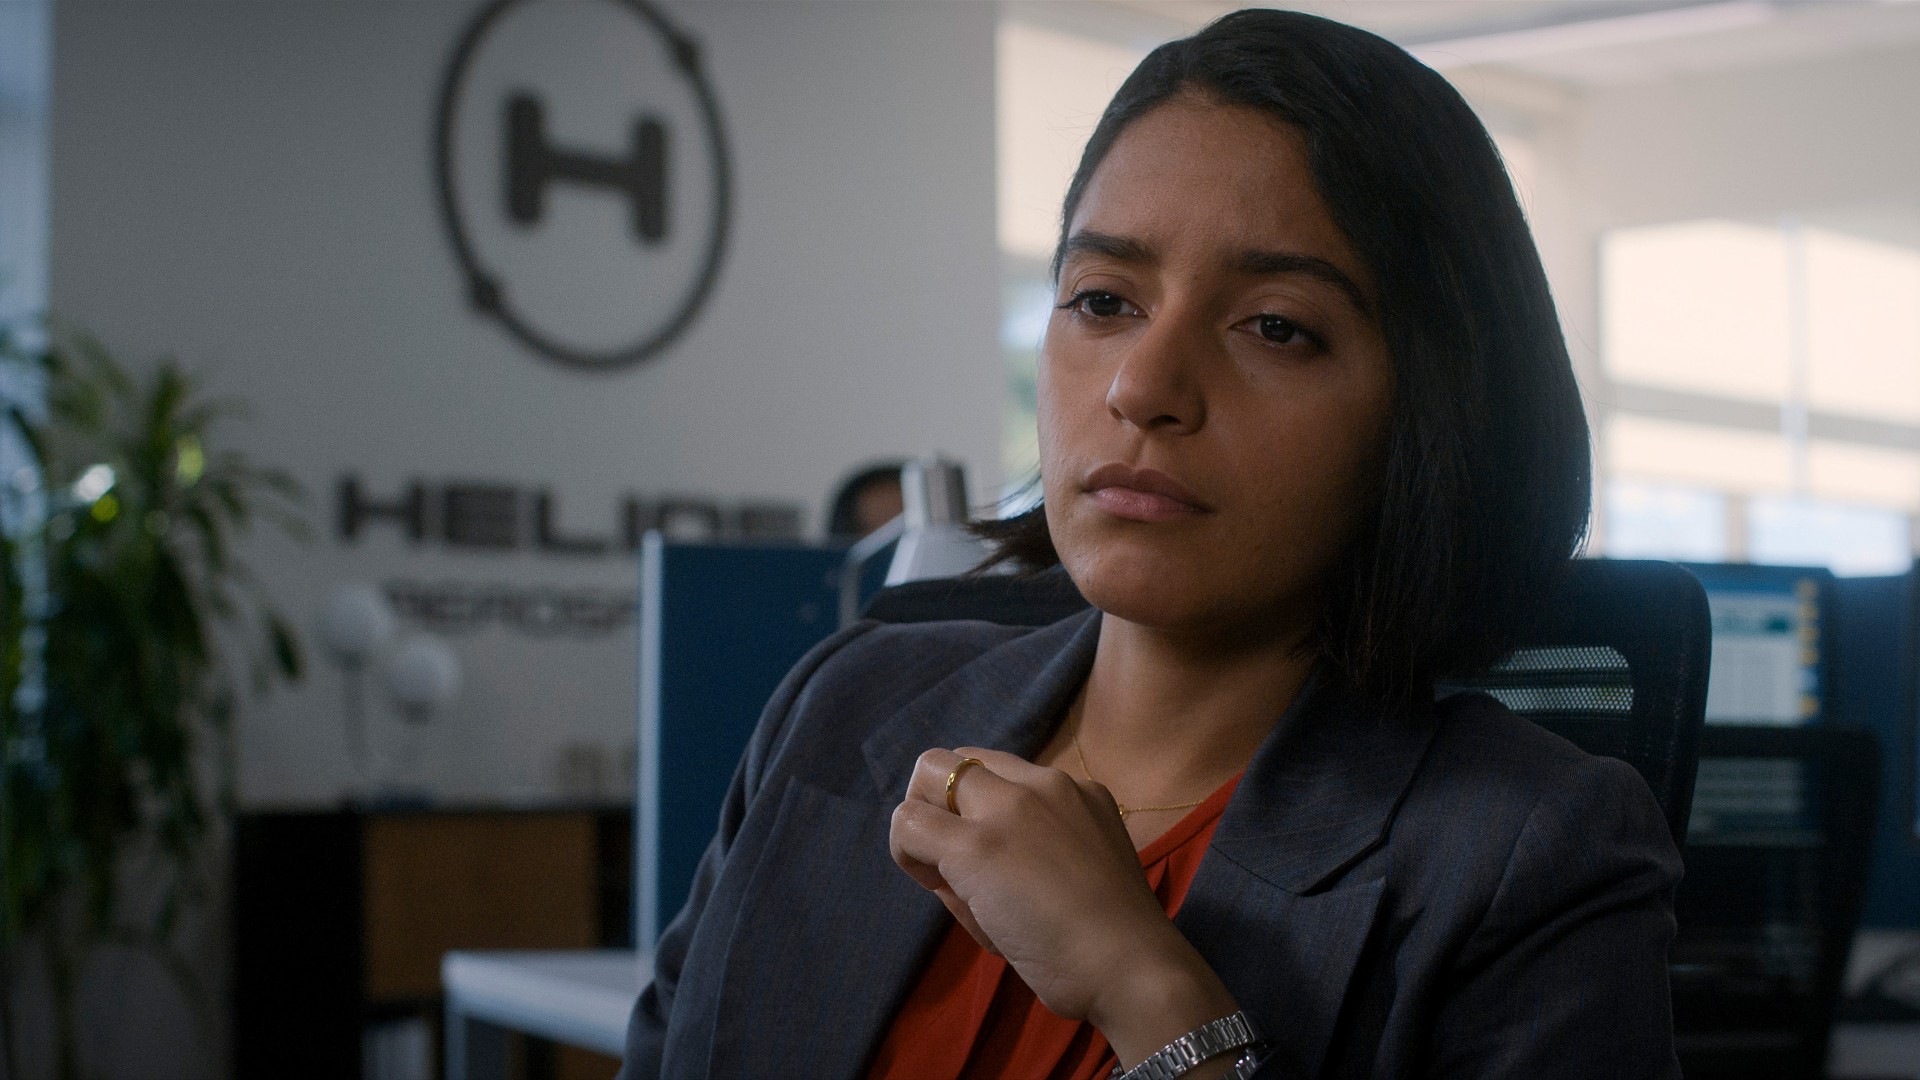 Close up of a woman sitting down. She is wearing a business suit with an orange shirt underneath. She has shoulder-length dark hair. She has a serious expression on her face as she contemplates the situation. In the office background there is a large H in a circle with the text 'Helios' underneath.